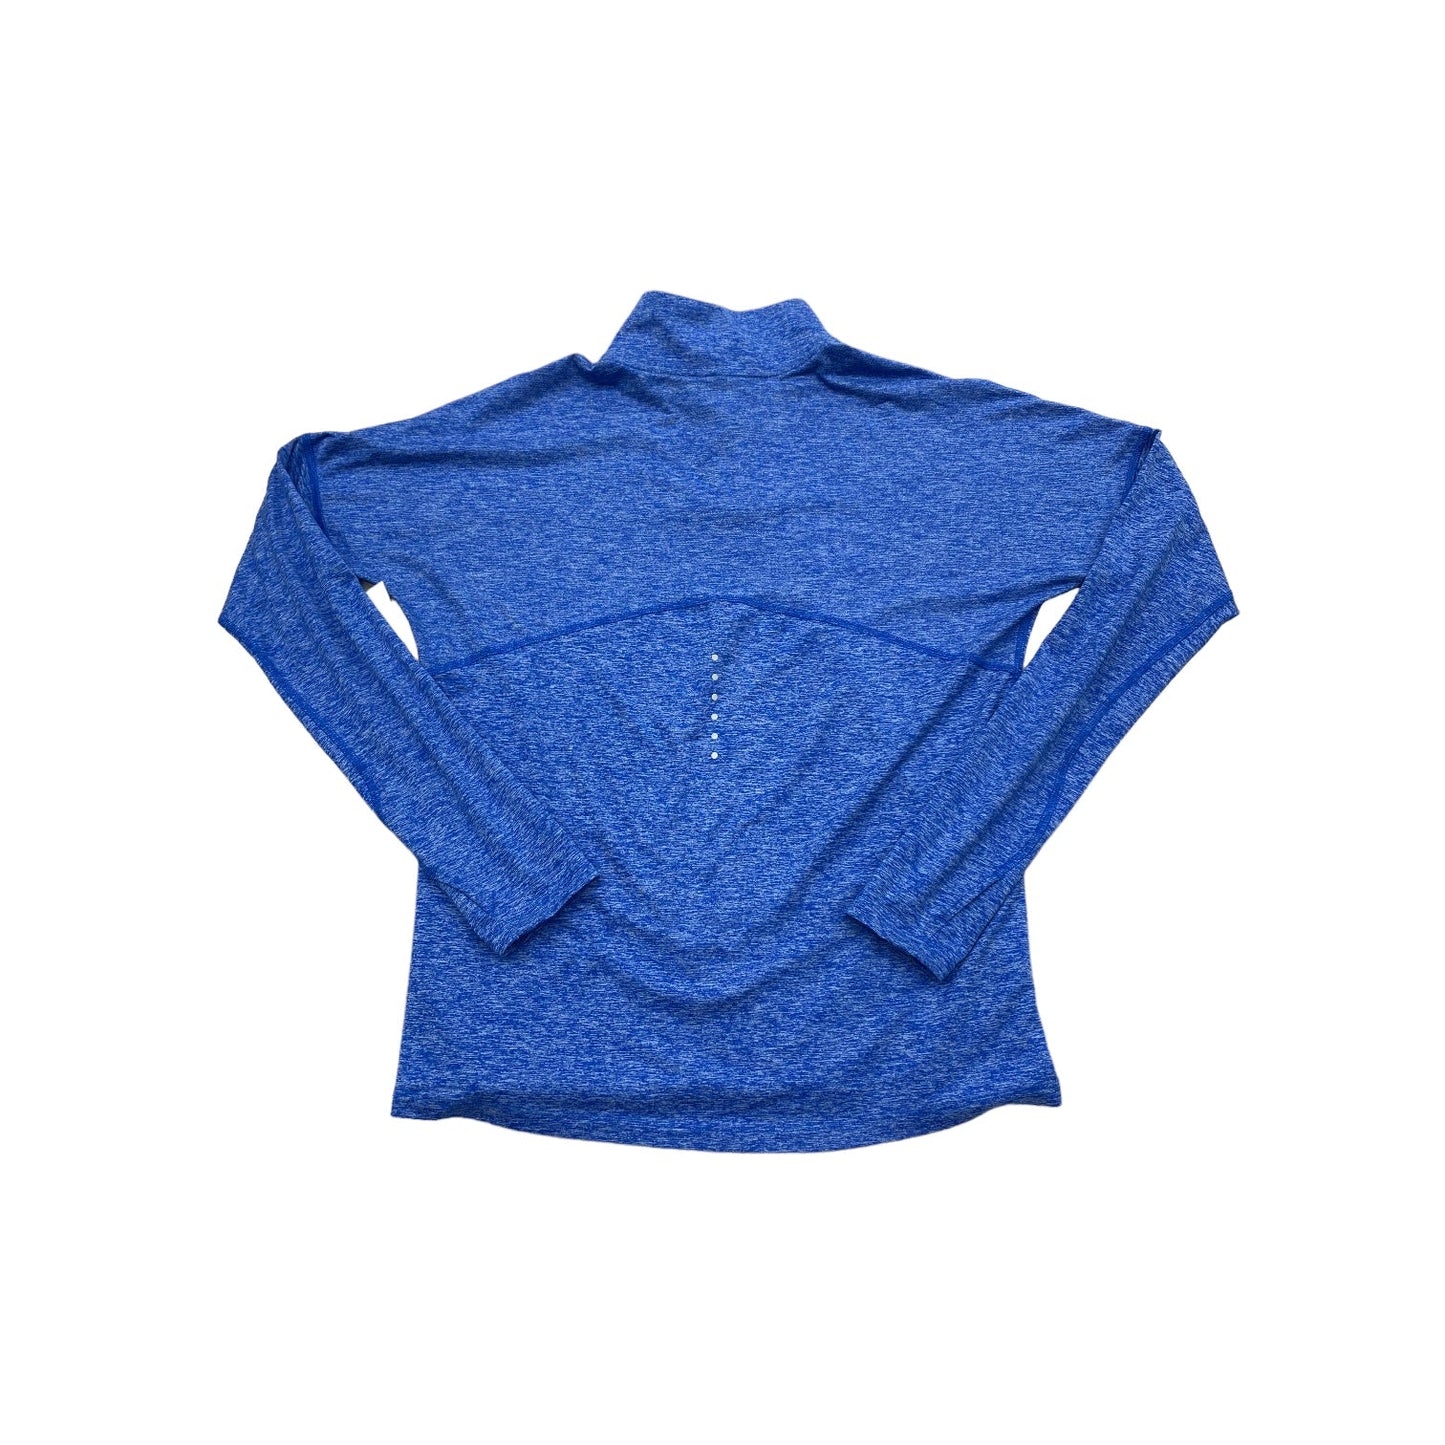 Blue Athletic Top Long Sleeve Collar Nike, Size S